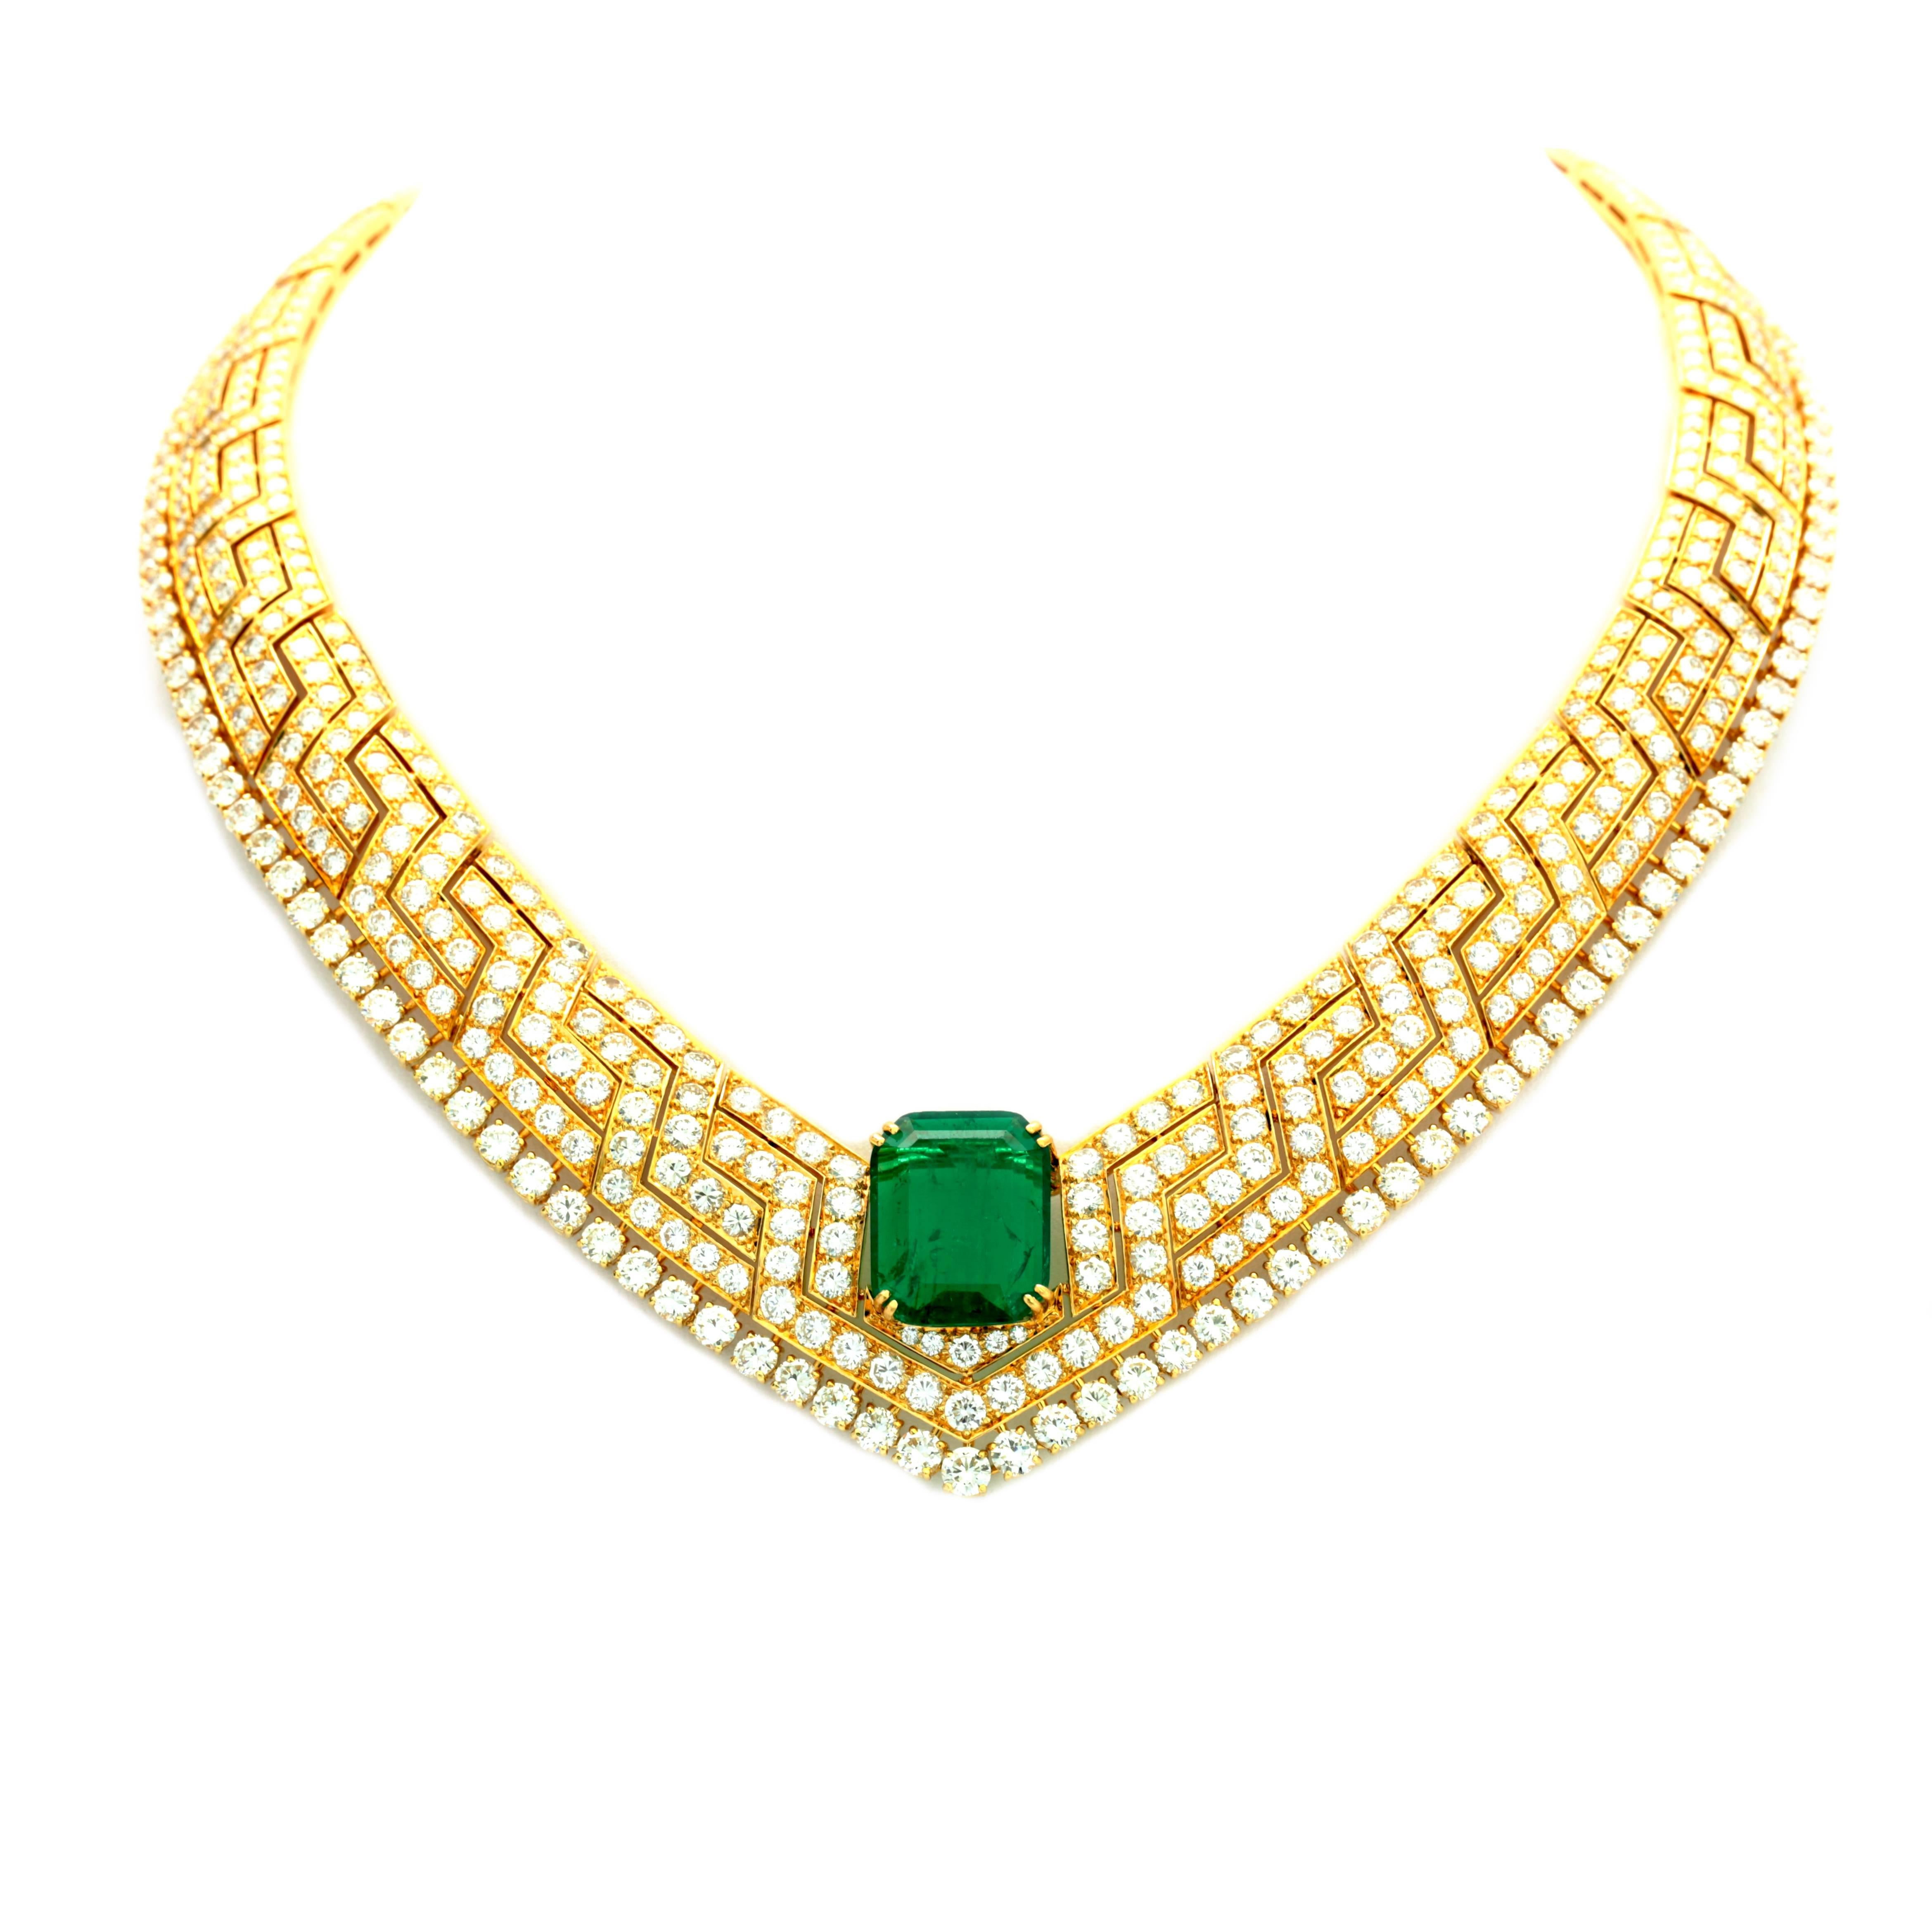 Women's AGL Certified 9.23 Carat Colombian Emerald Necklace For Sale